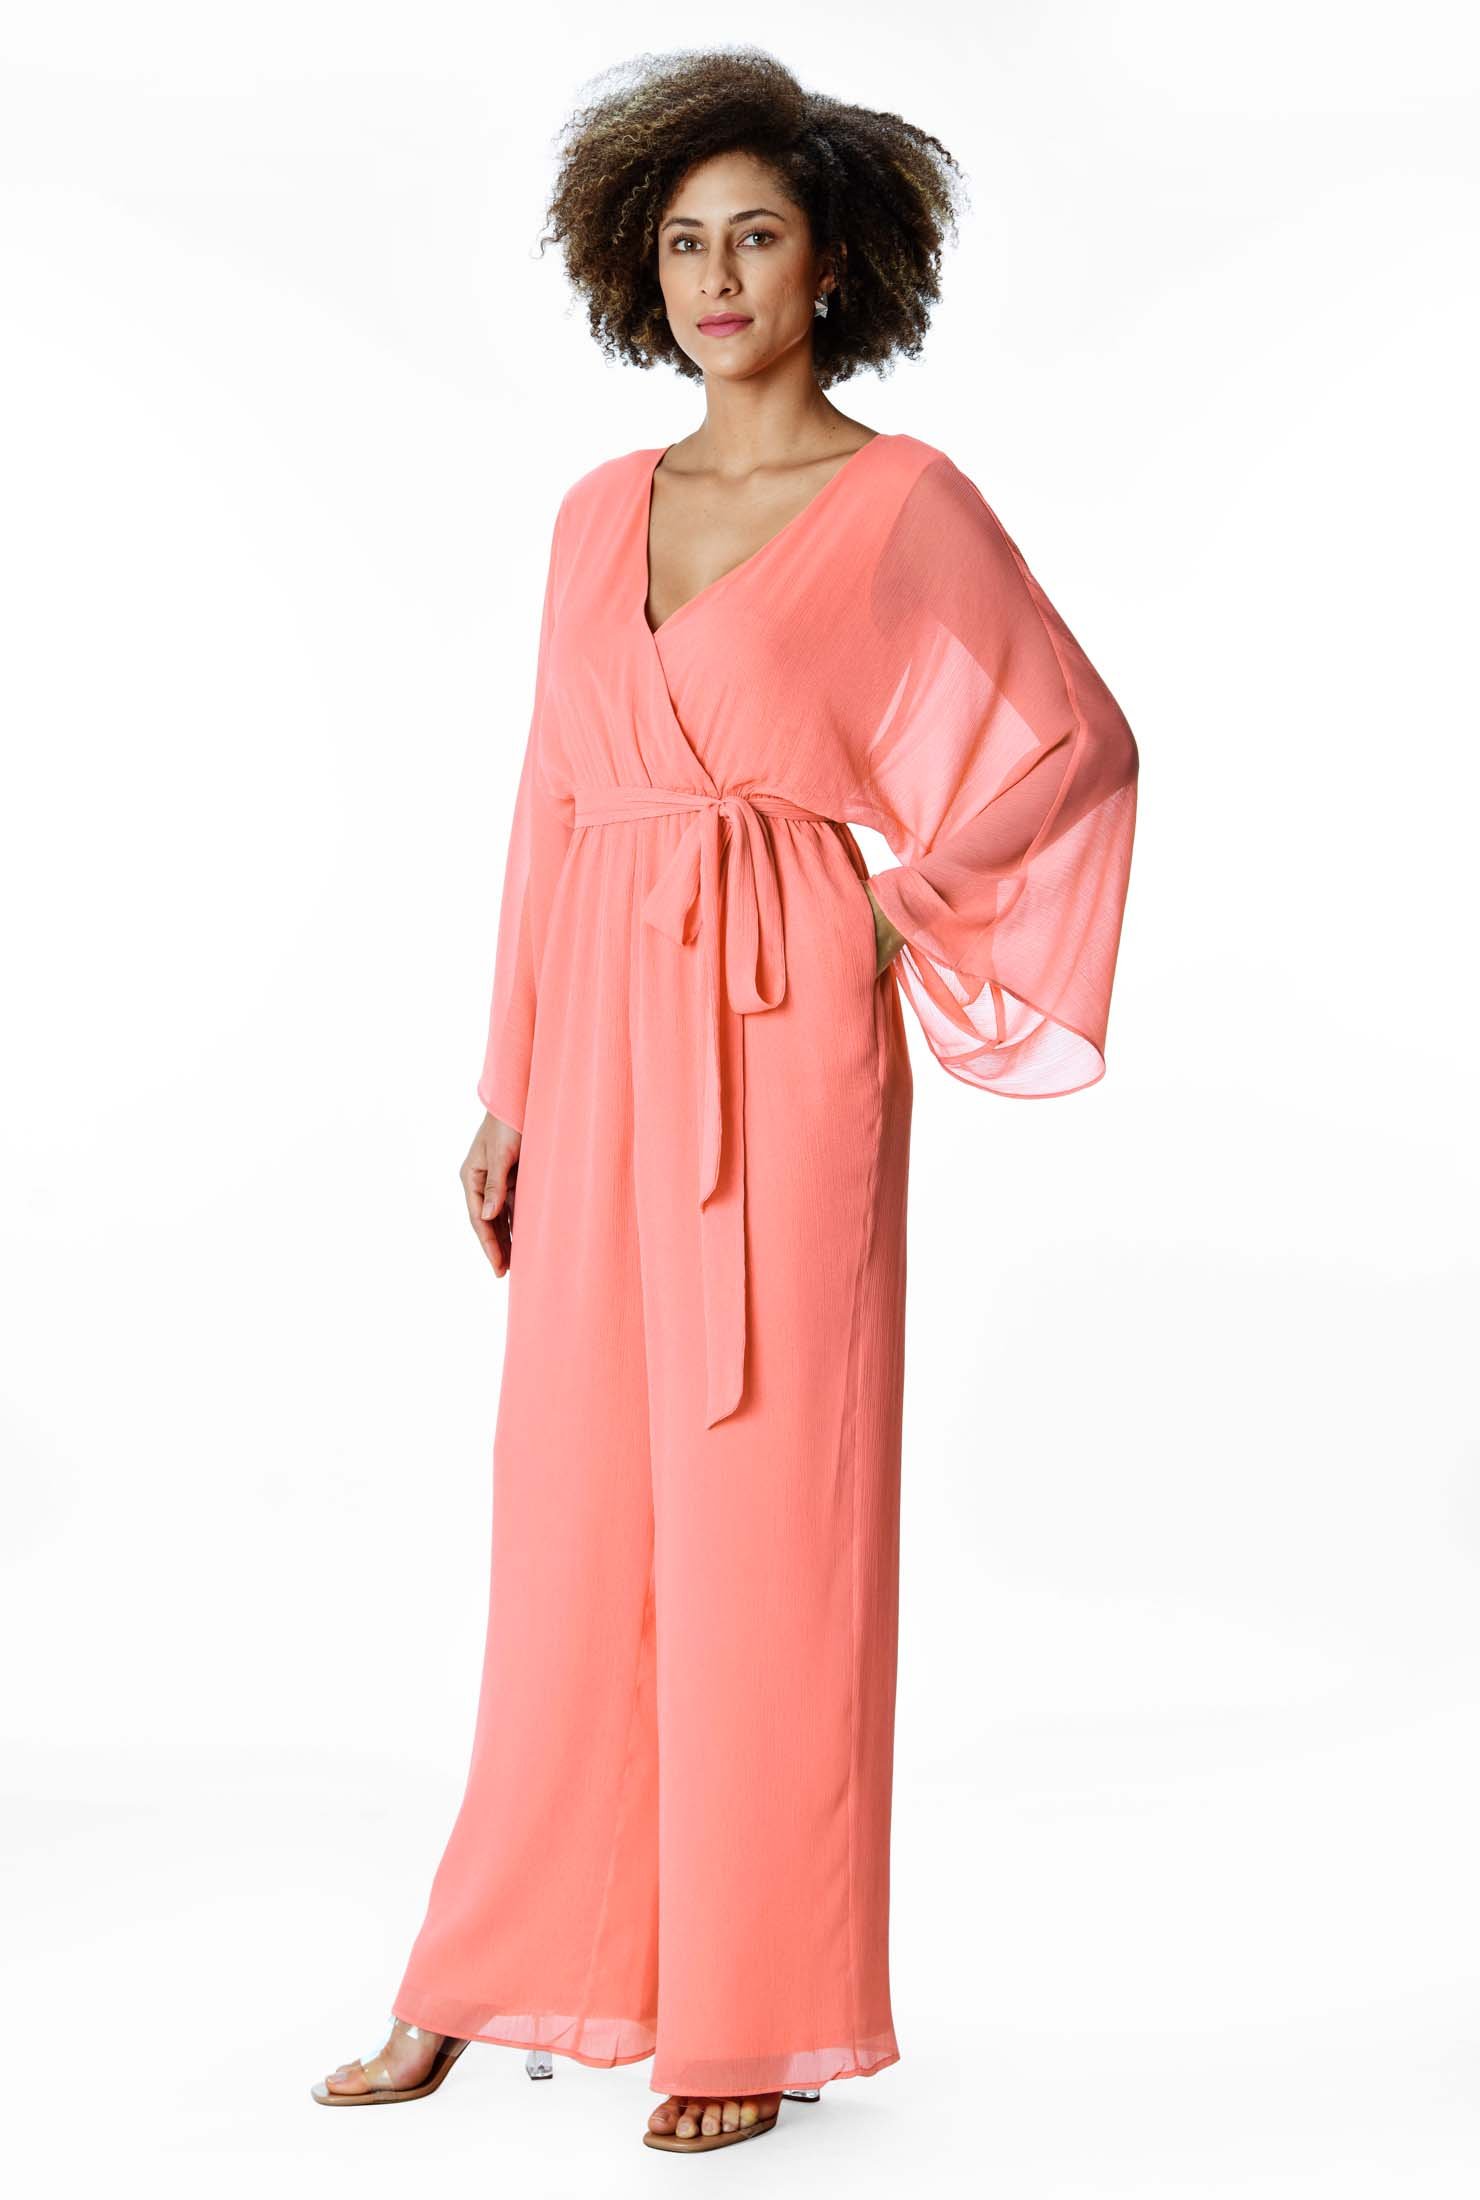 A winning option for formal wear, our chiffon jumpsuit features blousy dolman sleeves and a plunging surplice neckline leading down to a ruched waist and wide legs for a flowing look.